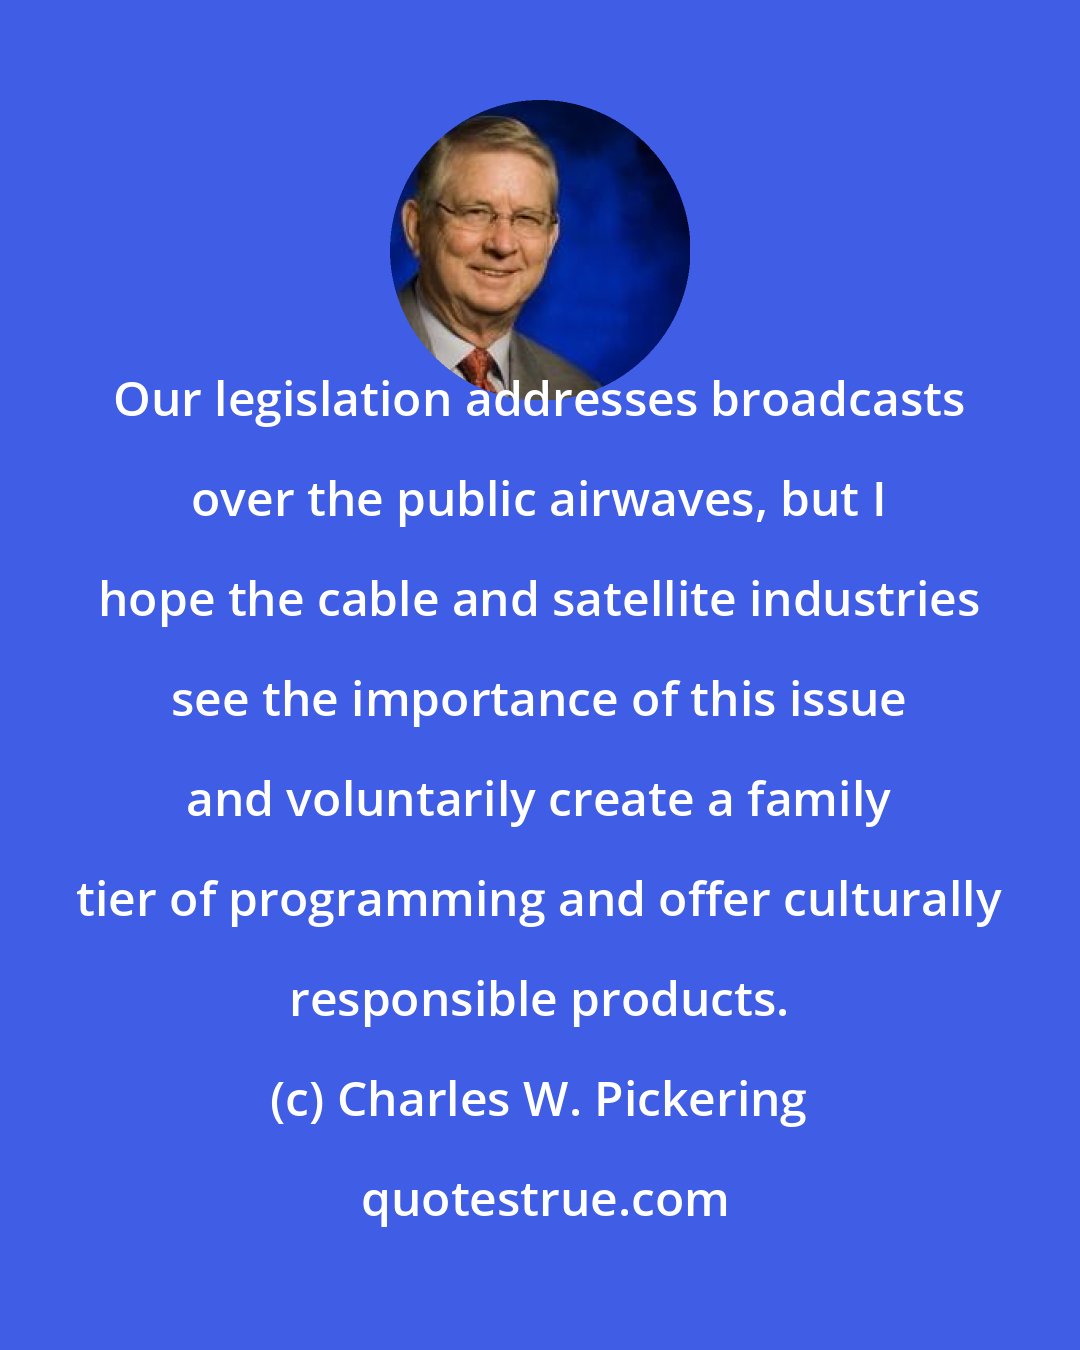 Charles W. Pickering: Our legislation addresses broadcasts over the public airwaves, but I hope the cable and satellite industries see the importance of this issue and voluntarily create a family tier of programming and offer culturally responsible products.